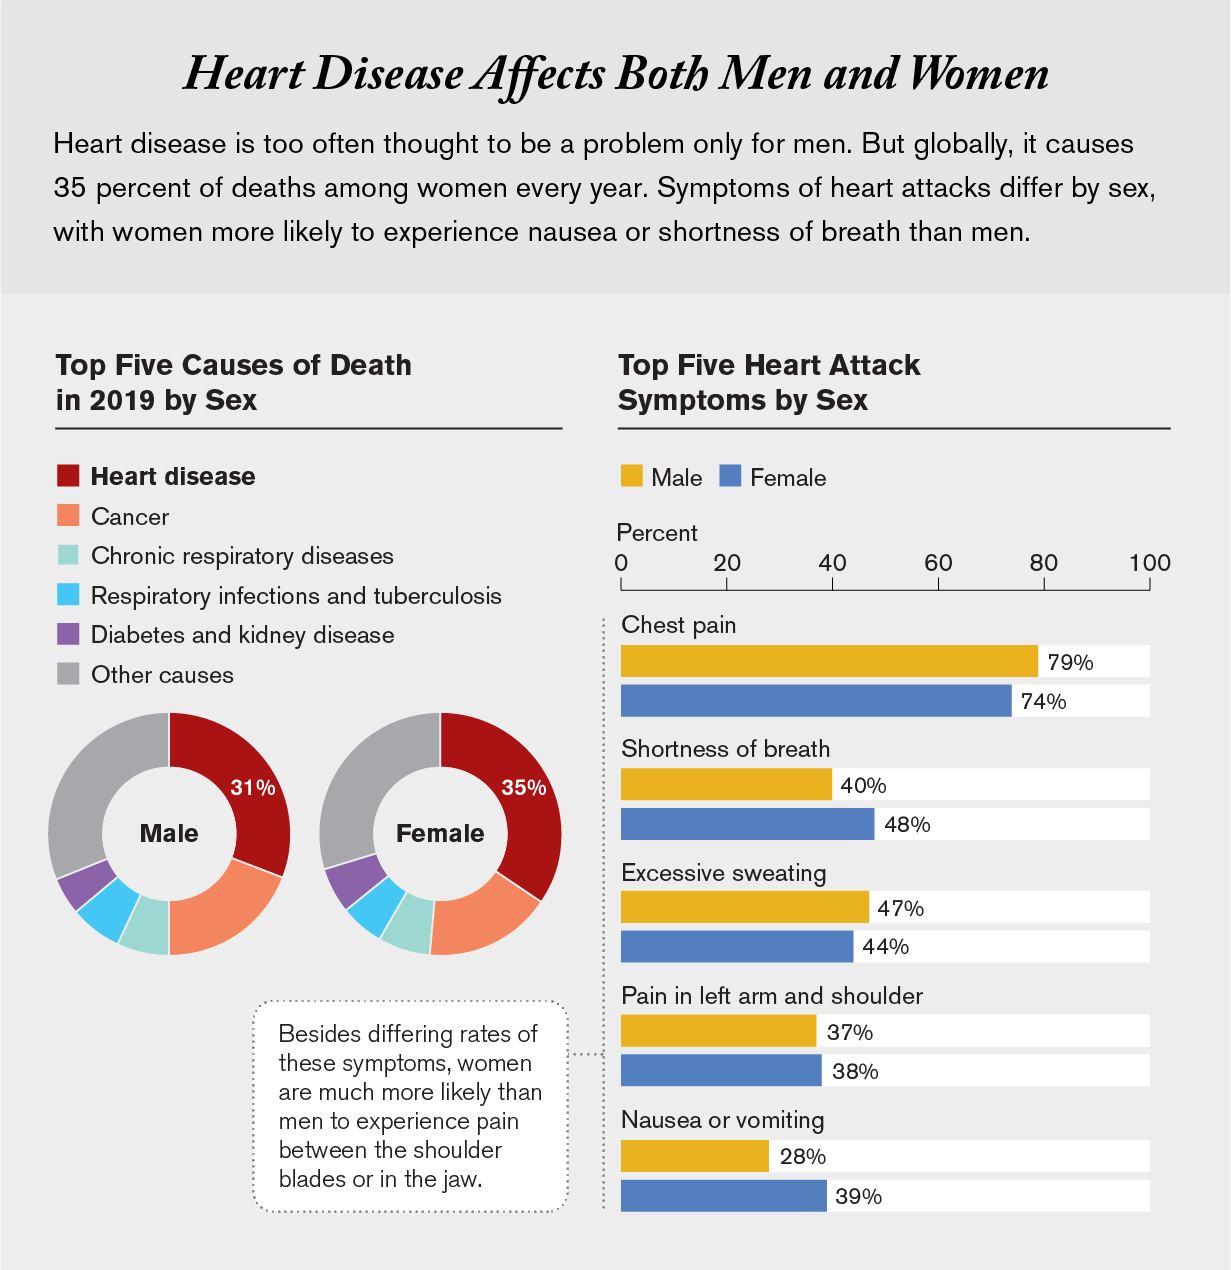 Charts show top five causes of death in 2019 and top five heart attack symptoms by sex.